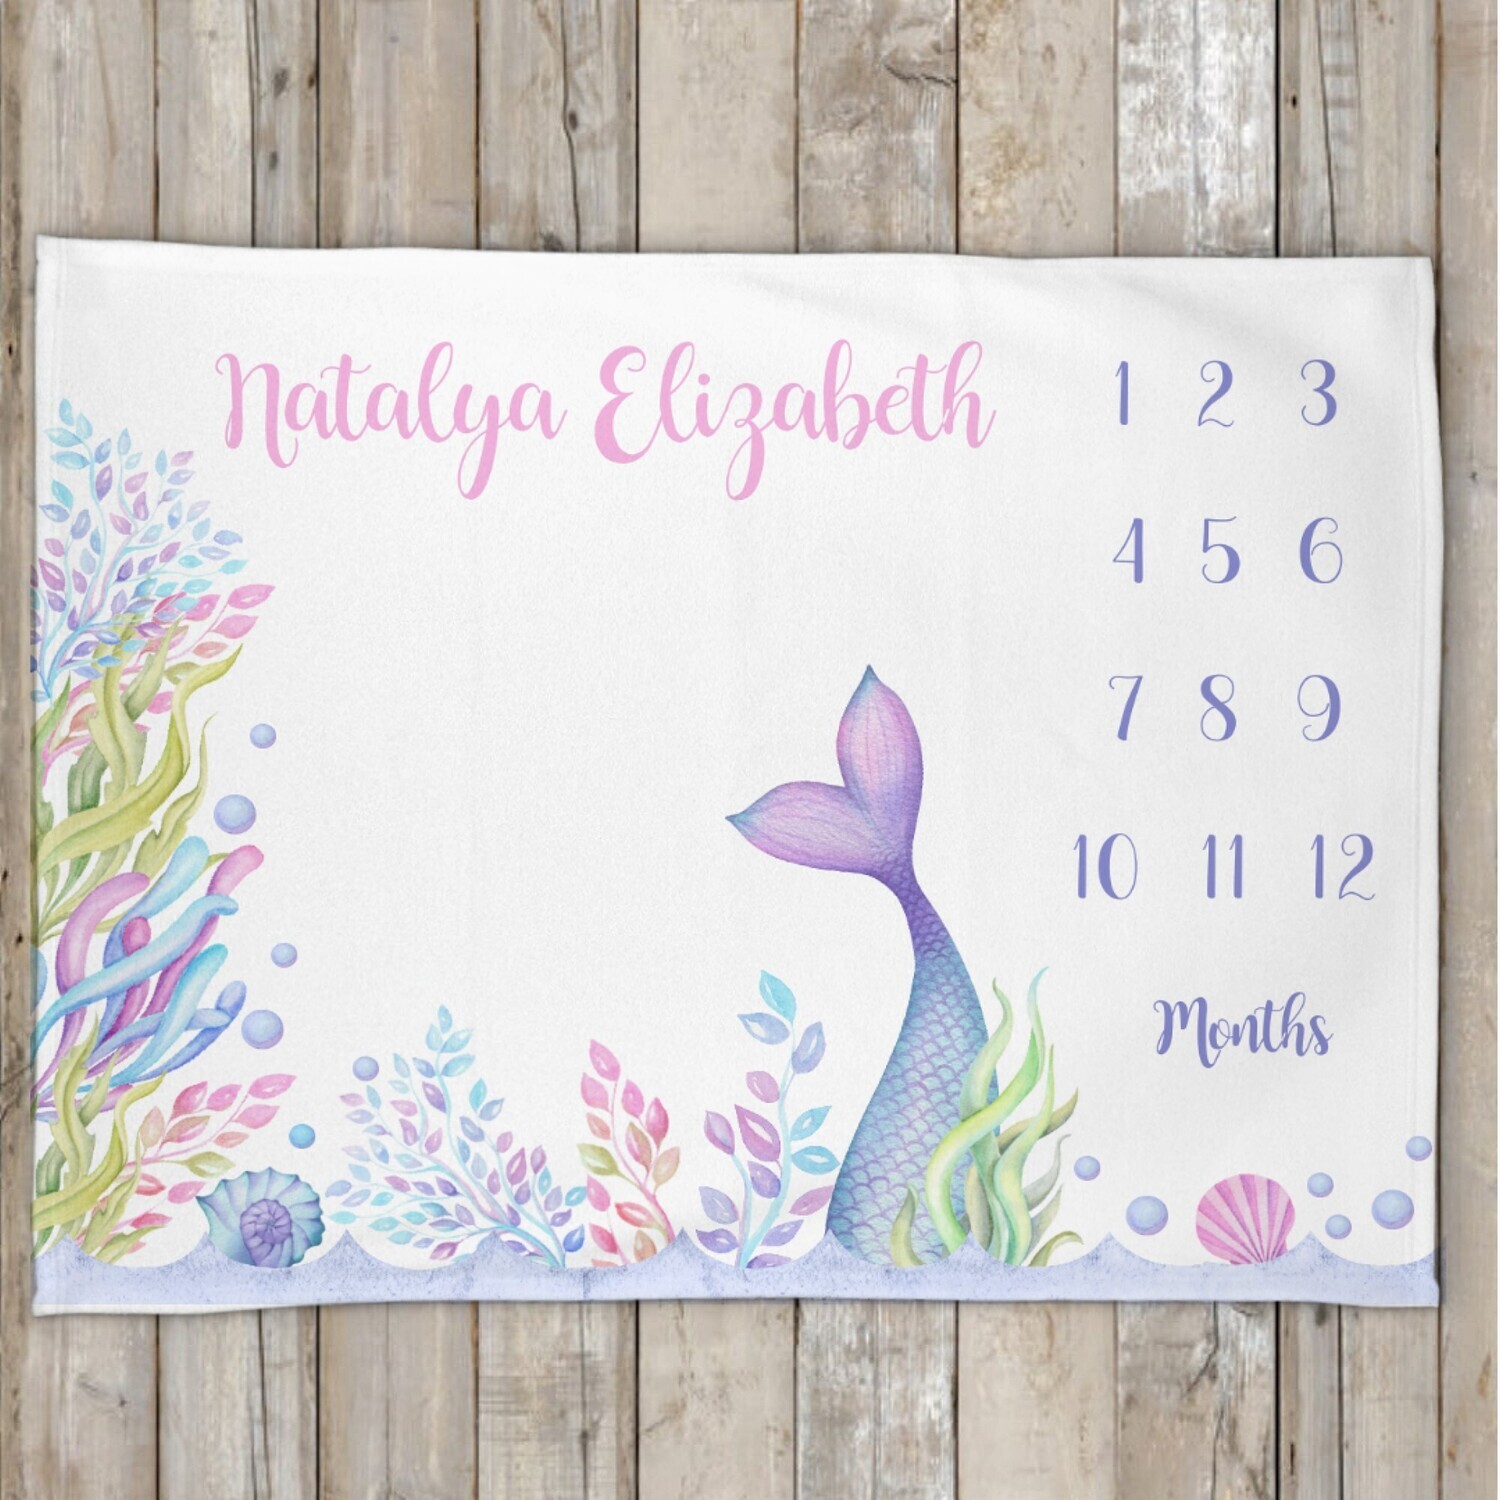 Mermaid Tail Baby Girl Personalized Milestone Blanket Baby Nursery Decor Month New Baby Shower Gift Baby Photo Op Backdrop